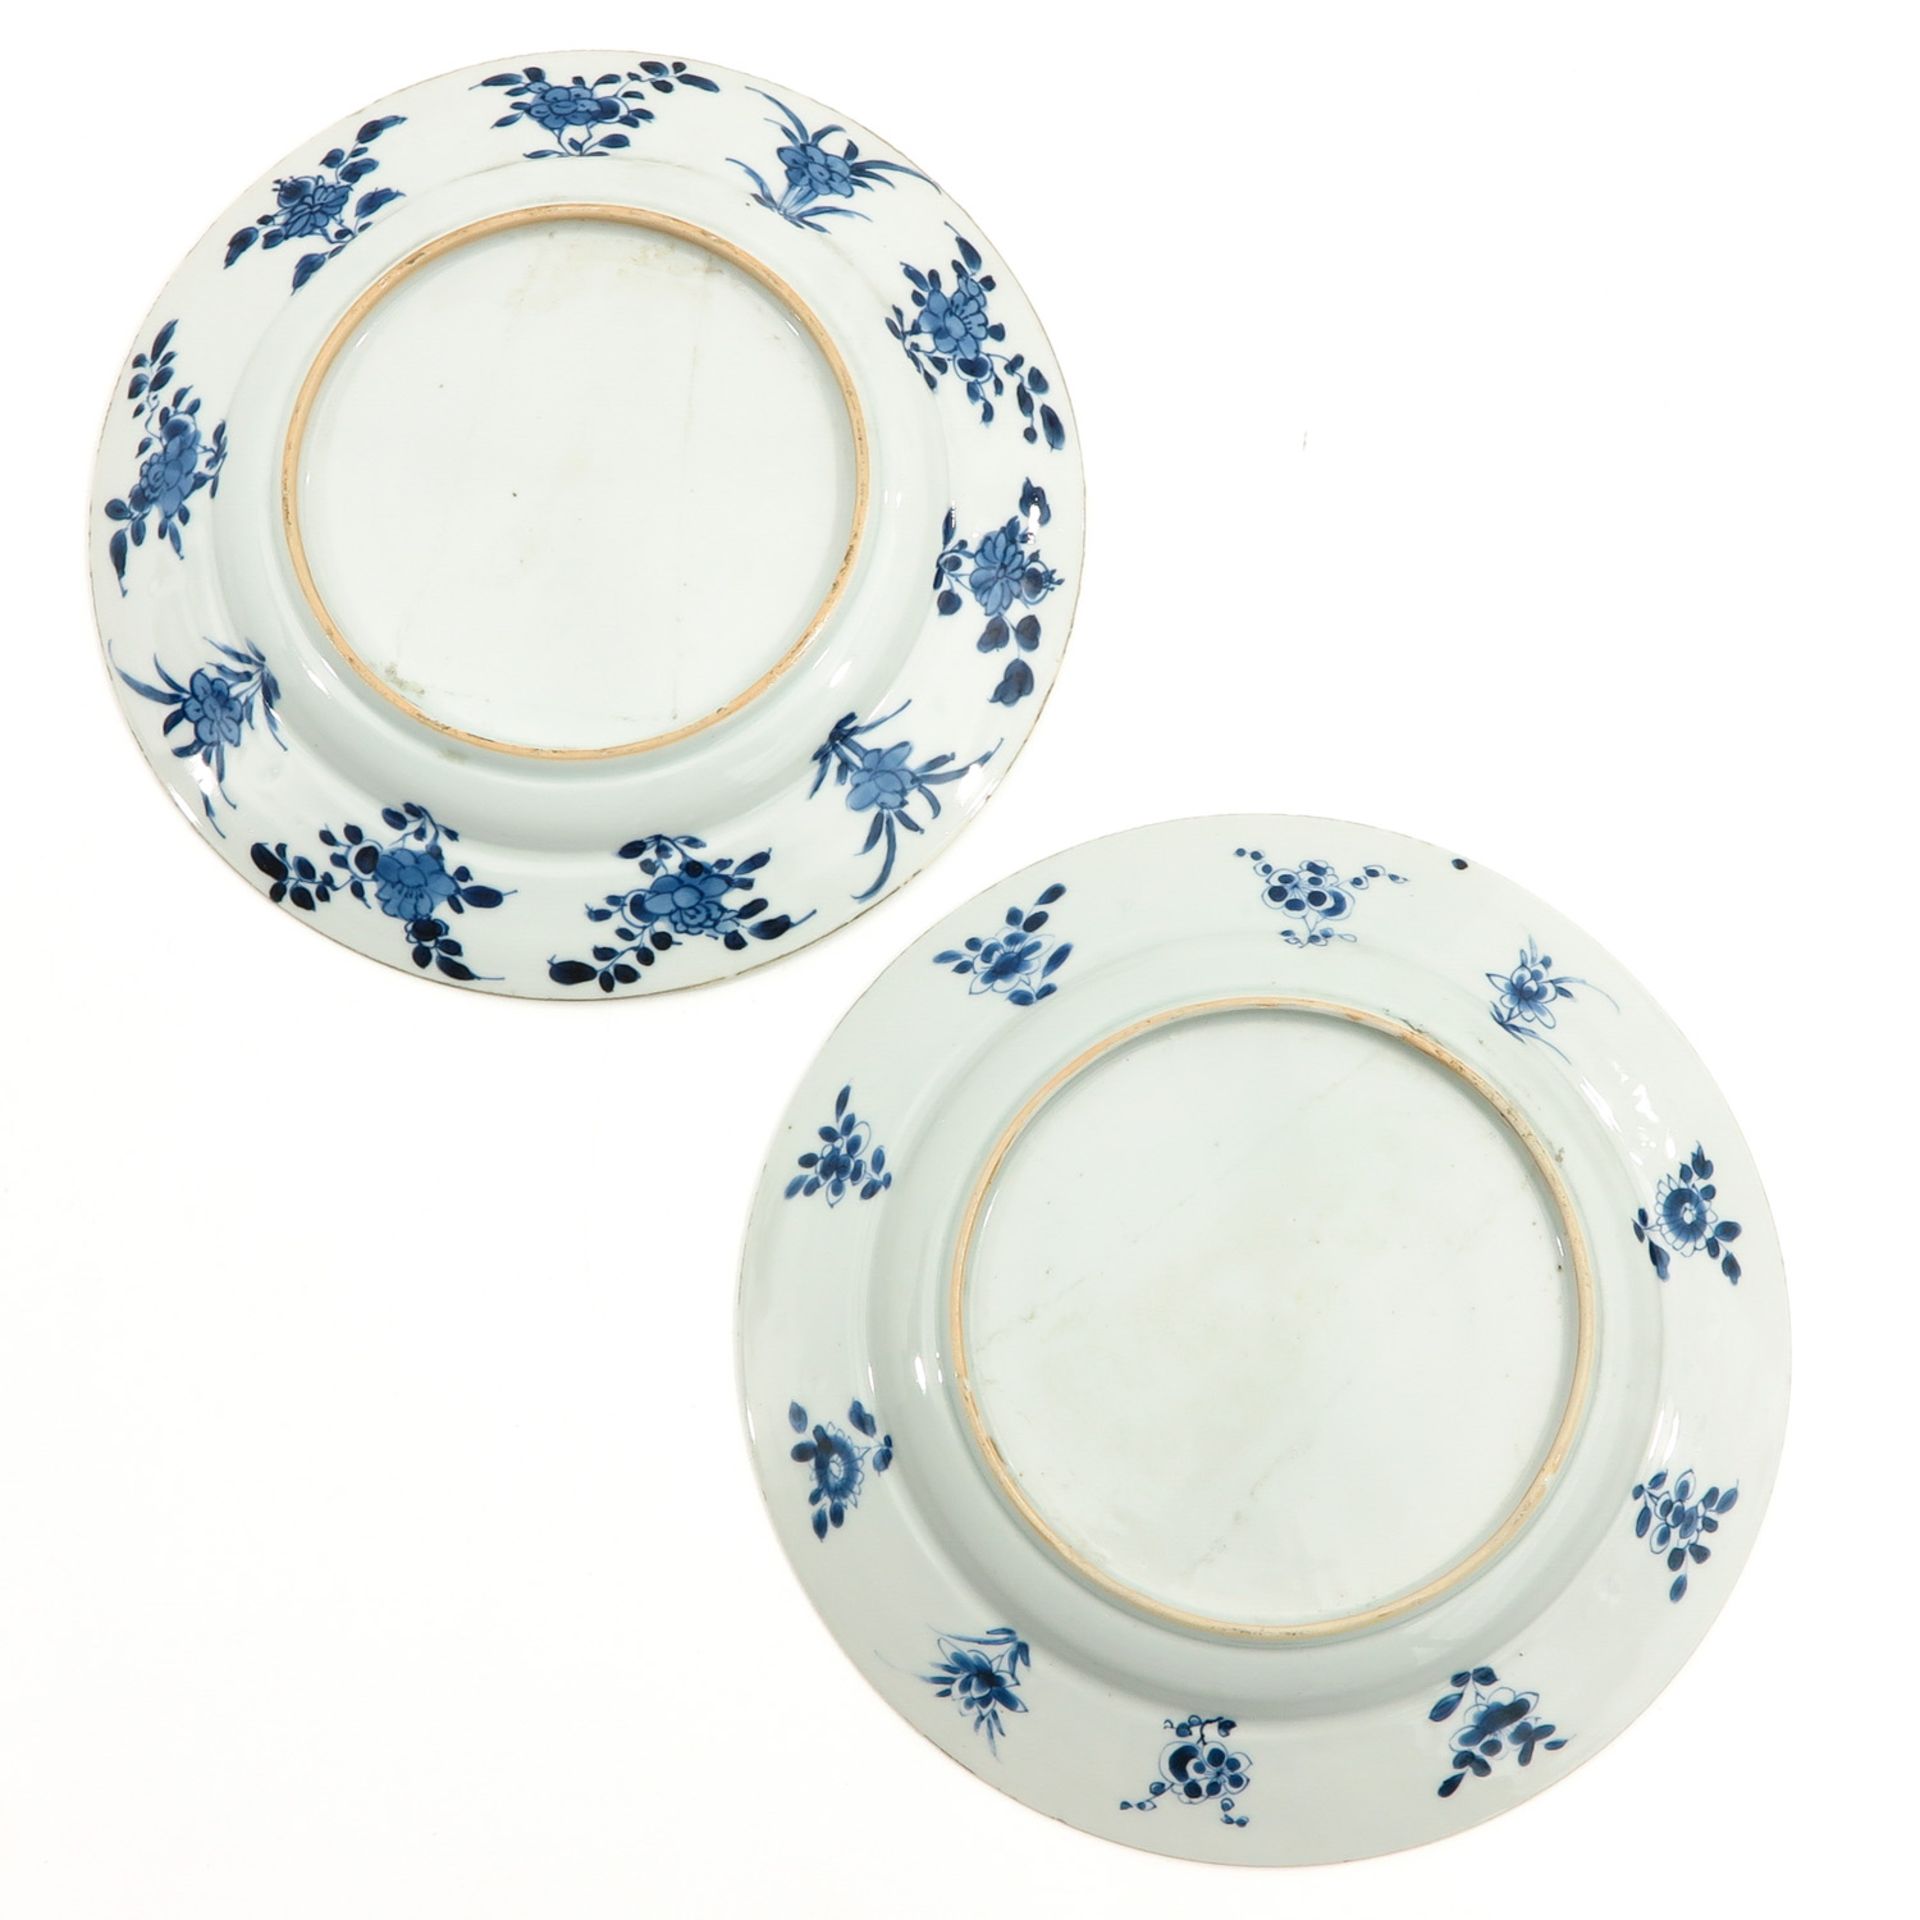 A Series of 6 Blue and White Plates - Image 8 of 10